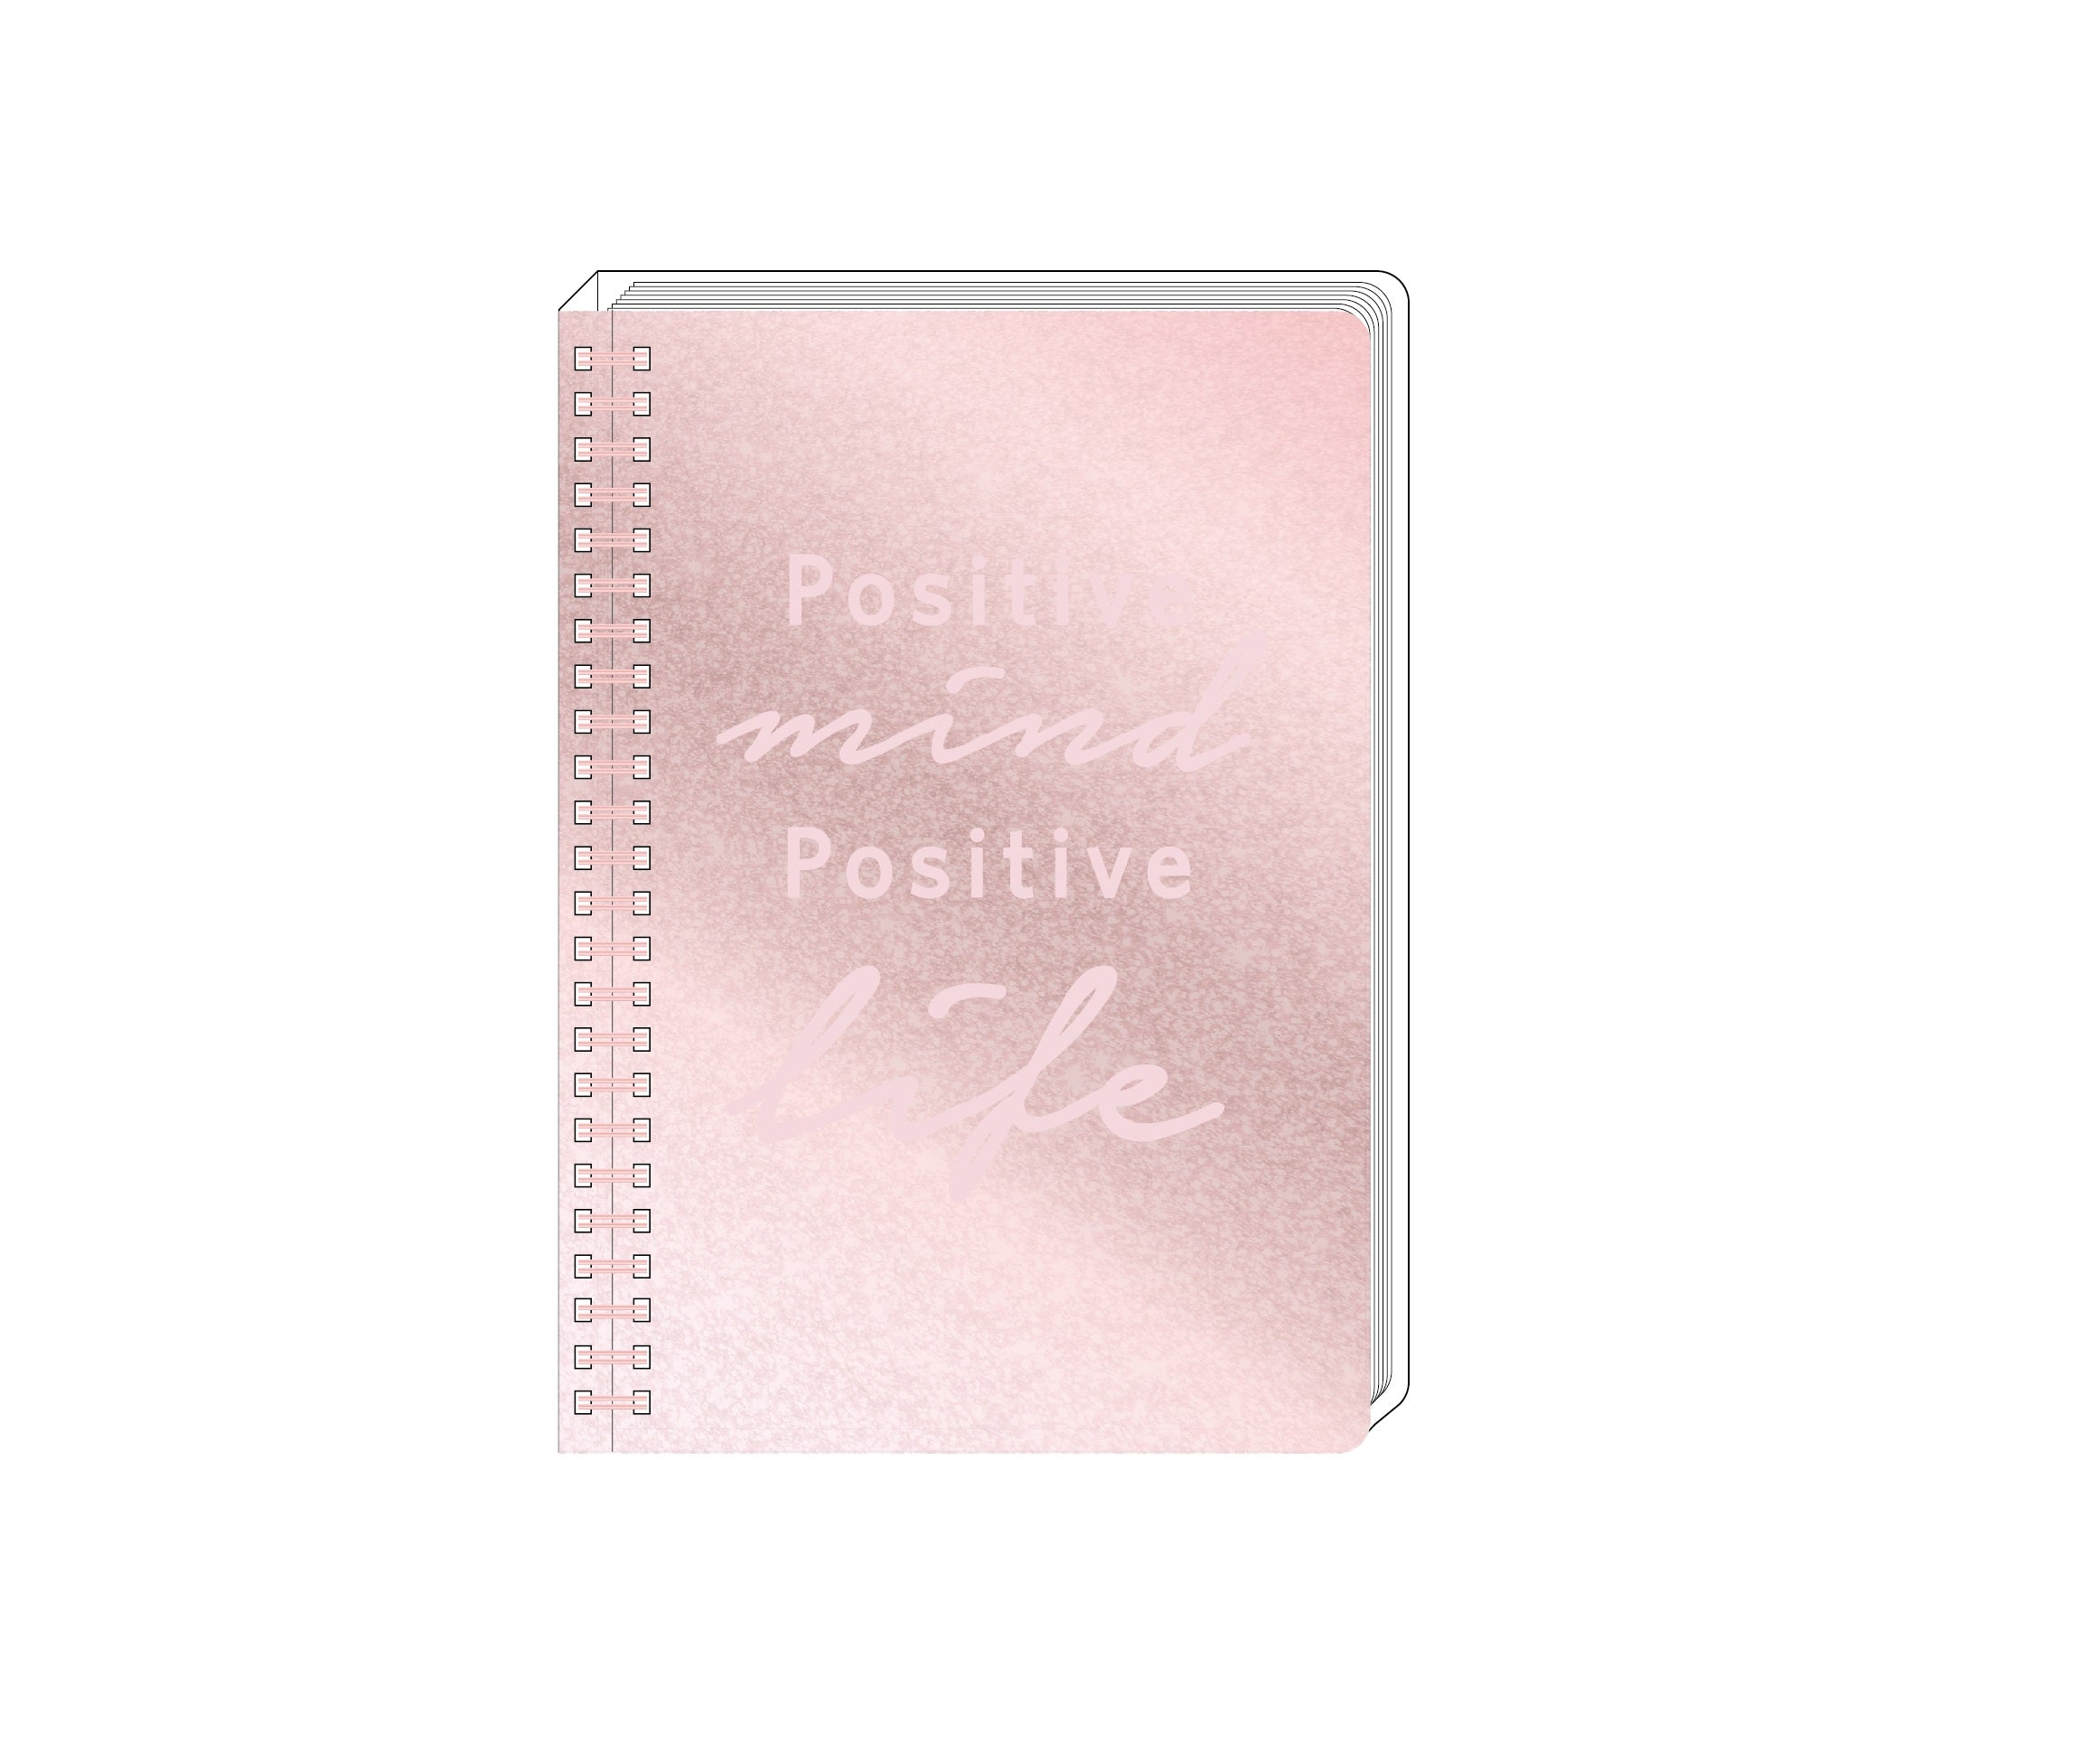 MINISO ROSE GOLD SERIES SOFT-COVER WIRE-BOUND BOOK ( 80 SHEETS ) PDQ 2015286510103 STATIONERY & GIFT